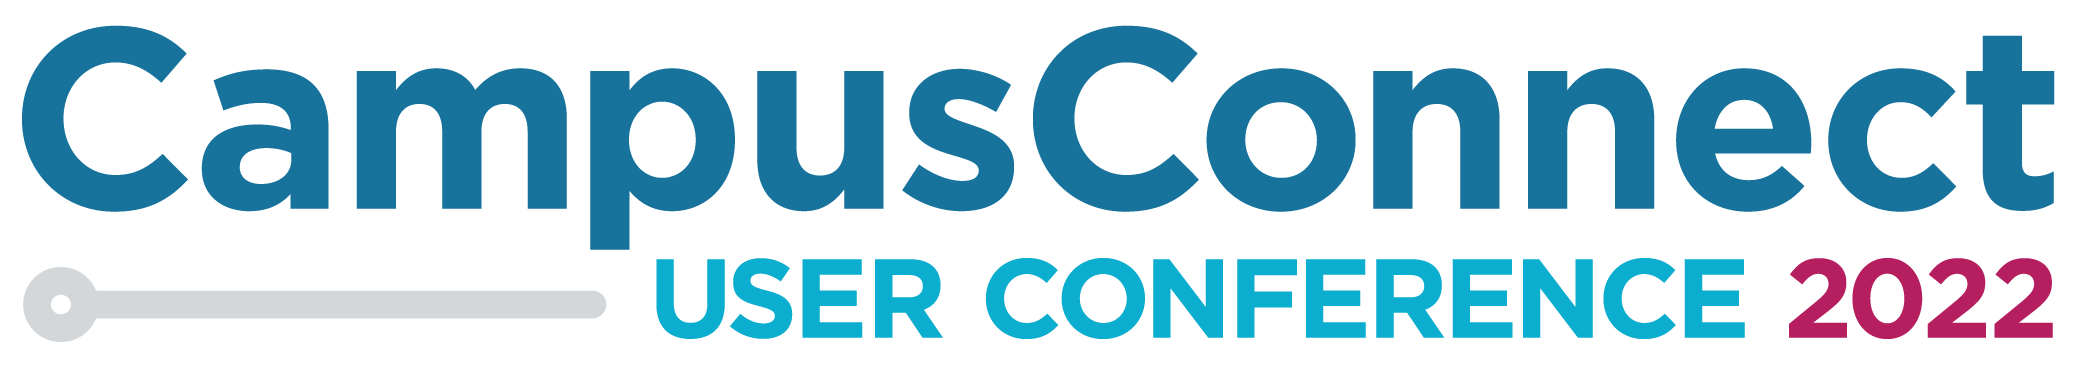 CampusConnect 2022 logo